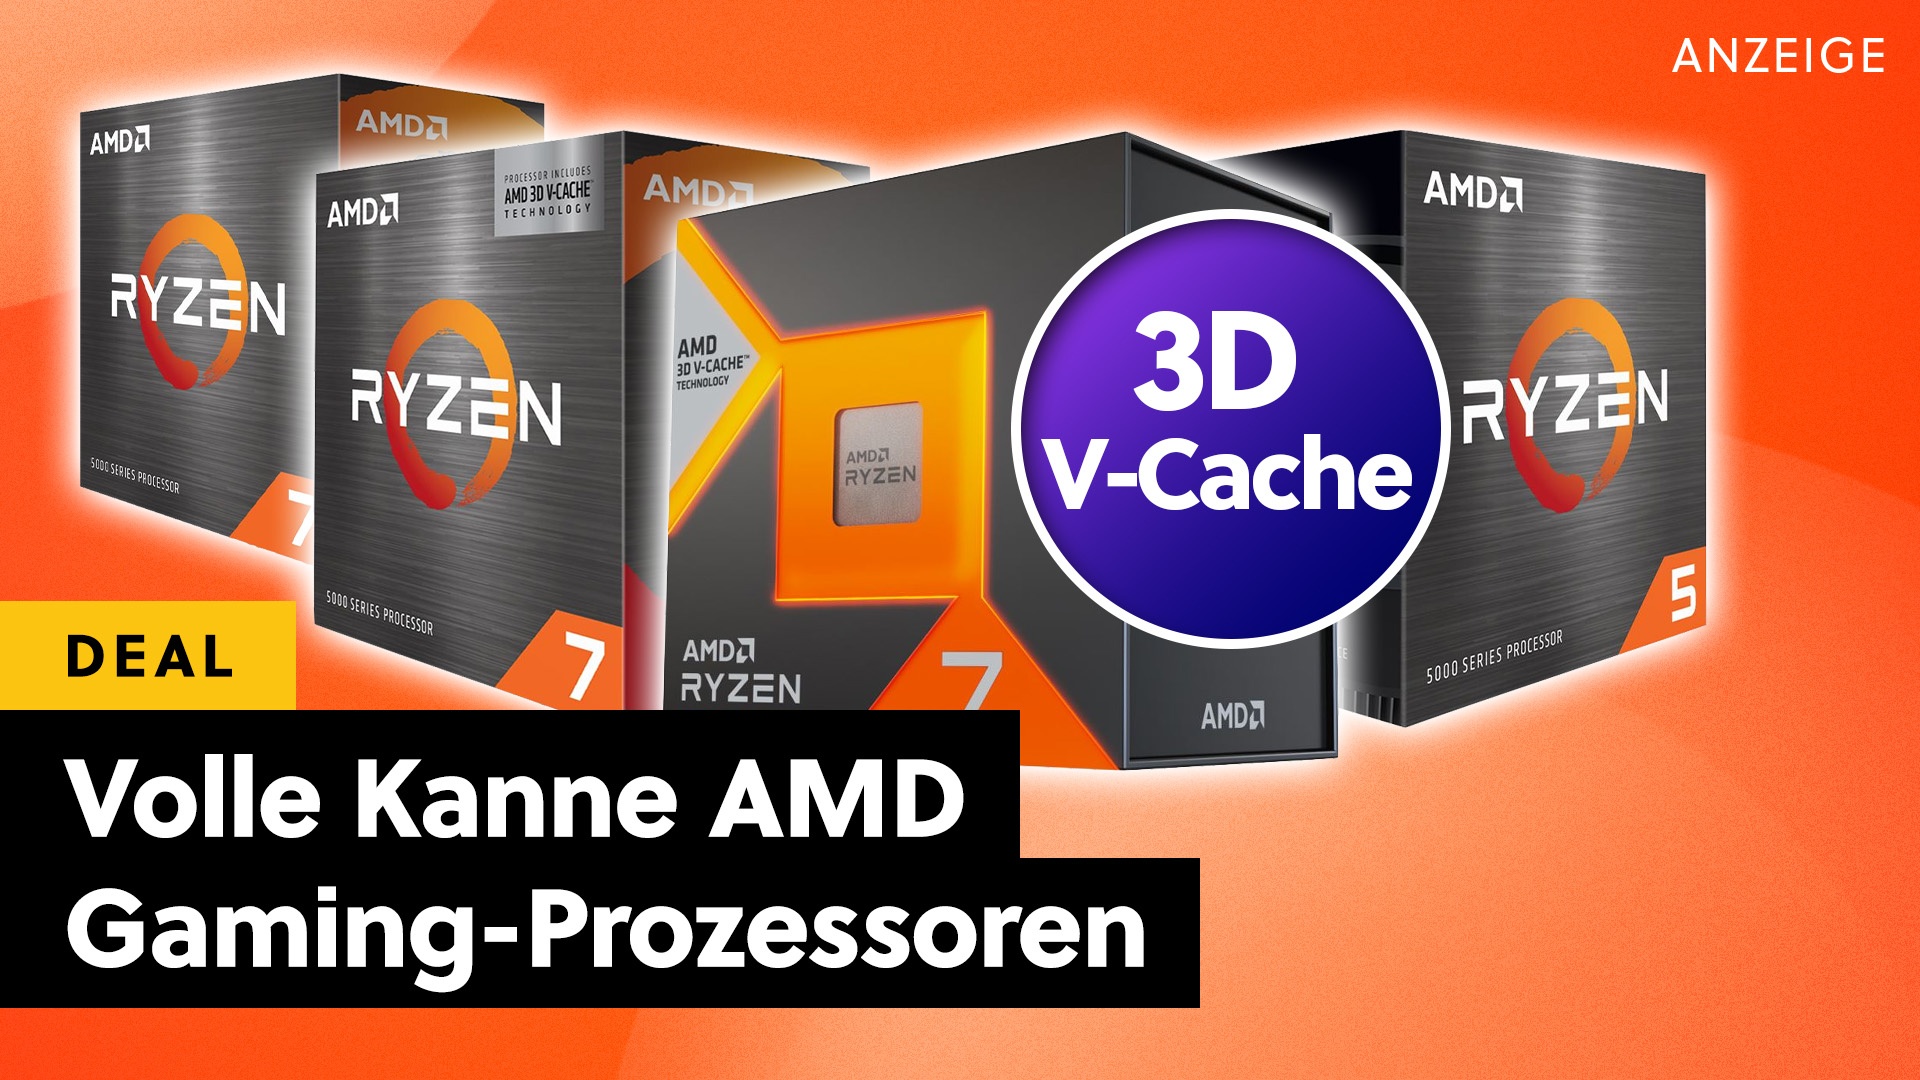 Best CPU for Gaming or Cheaper Budget Option?  These AMD Ryzen processors are now heavily discounted!